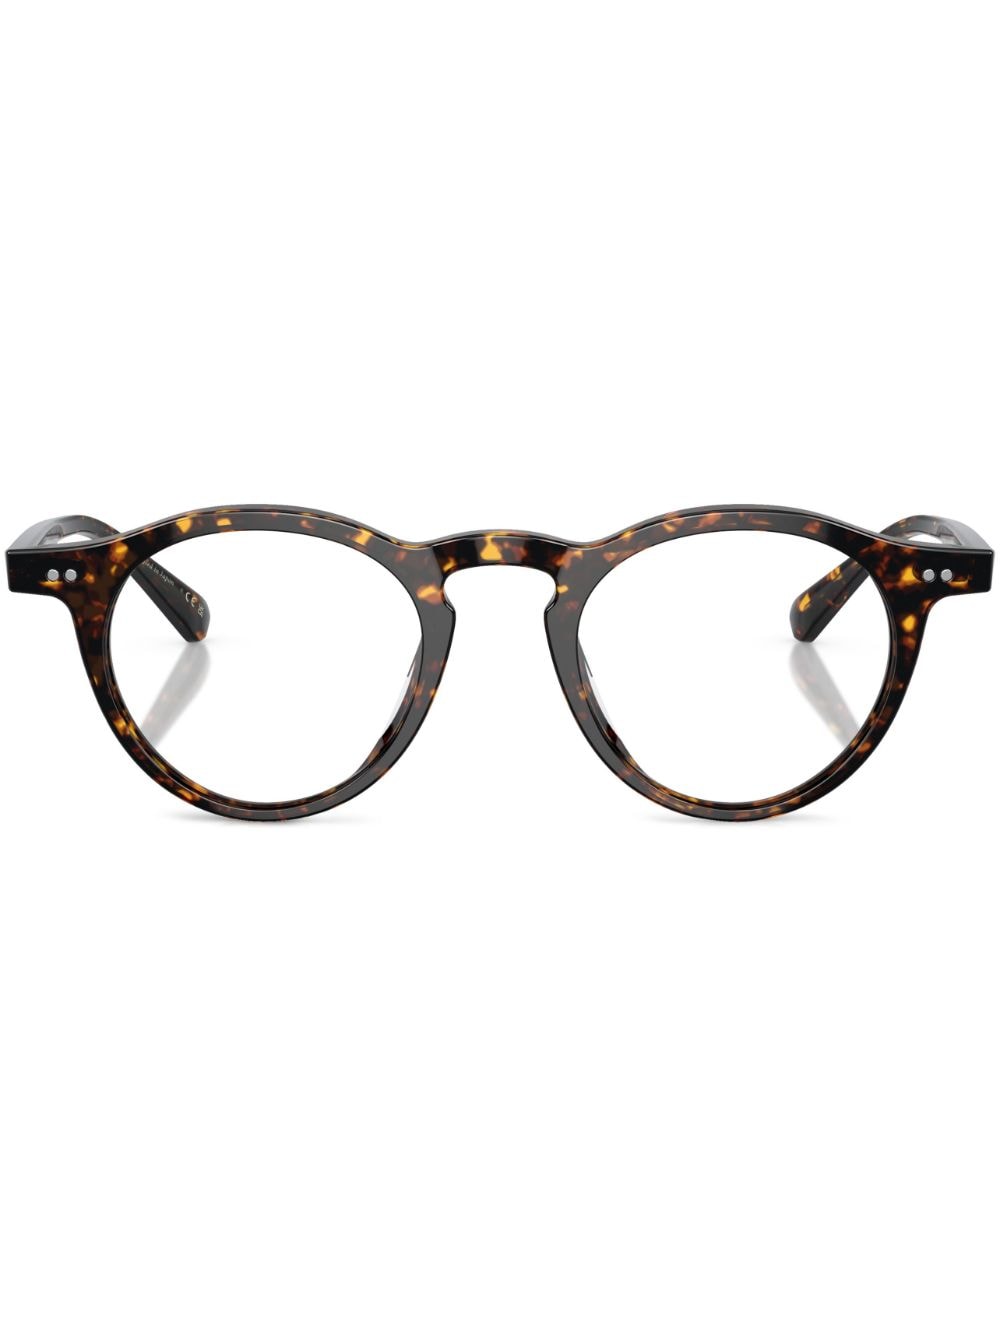 Oliver Peoples tortoiseshell club round-frame glasses - Green von Oliver Peoples